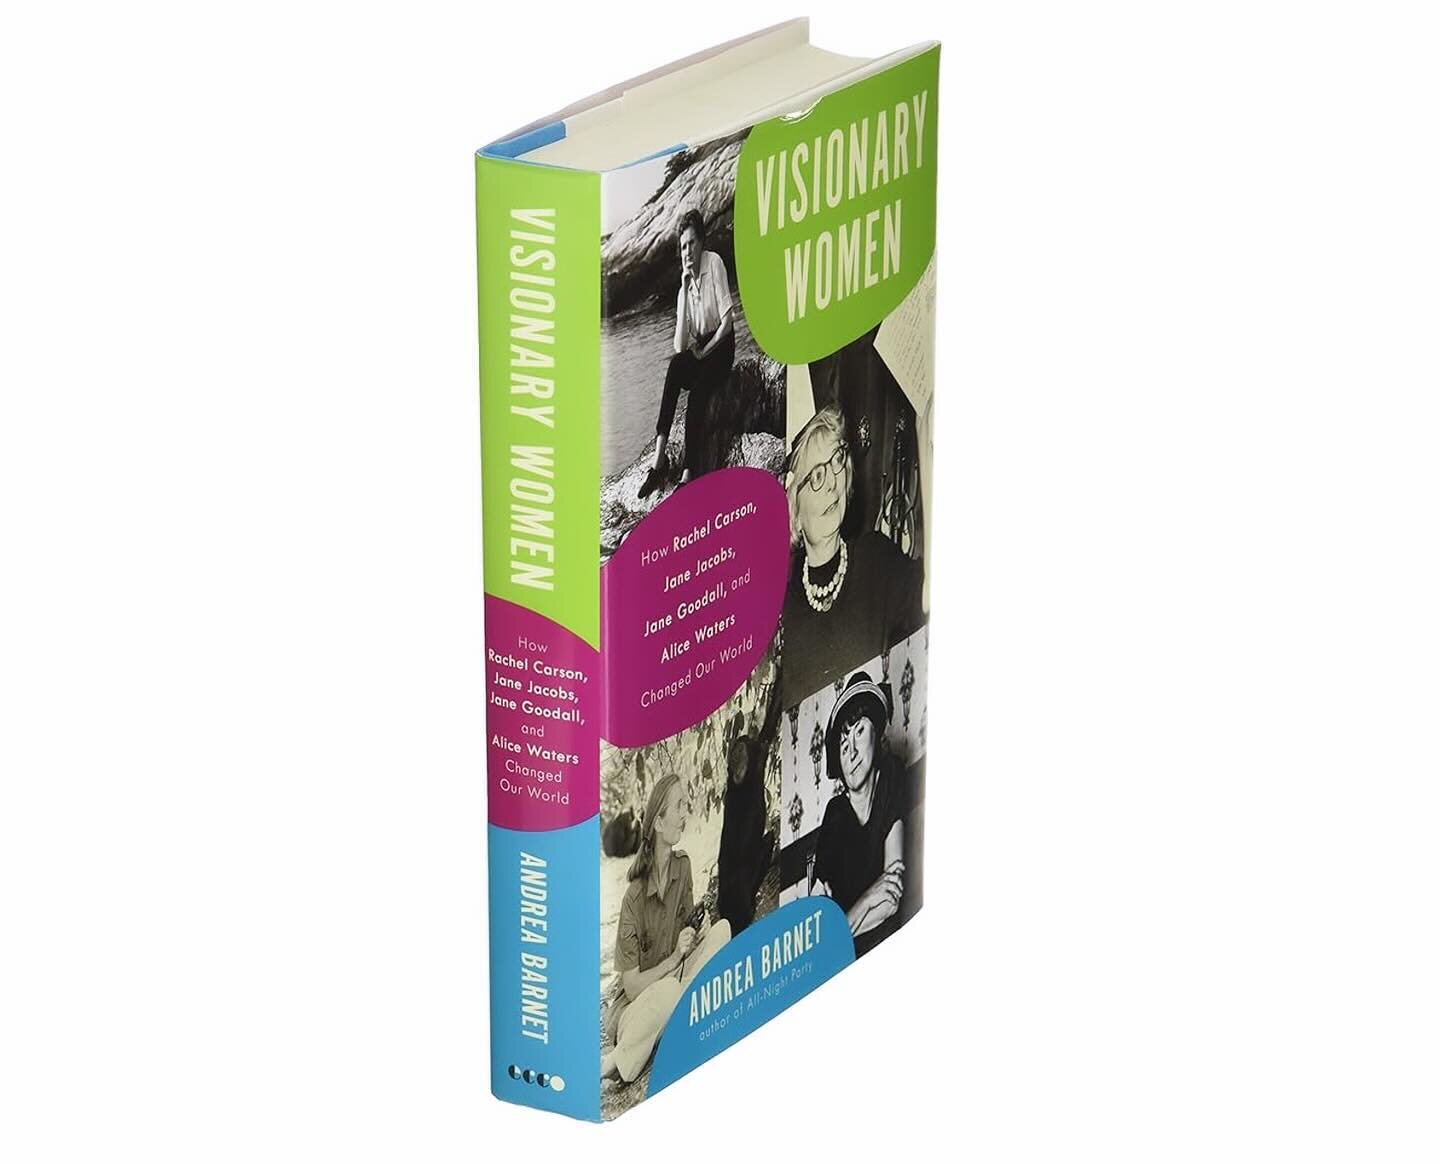 Getting ready for March 8th. The best day to celebrate women on whose shoulders we may stand. 

This is a book about four influential women we thought we knew well&mdash;Jane Jacobs, Rachel Carson, Jane Goodall, and Alice Waters&mdash;and how they sp